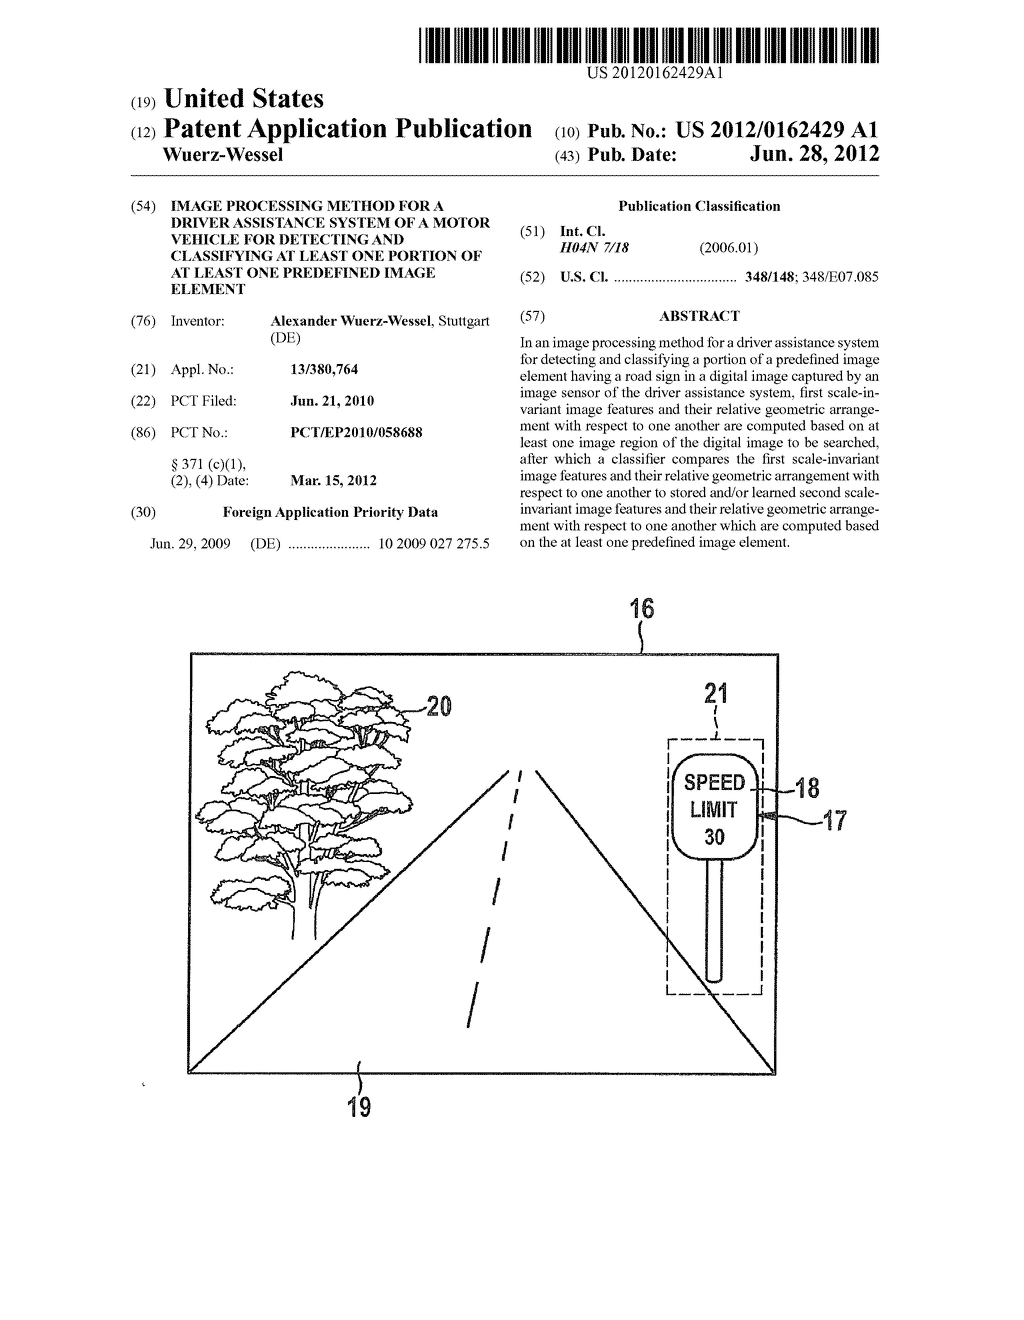 Image Processing Method for a Driver Assistance System of a Motor Vehicle     for Detecting and Classifying at Least one Portion of at Least one     Predefined Image Element - diagram, schematic, and image 01